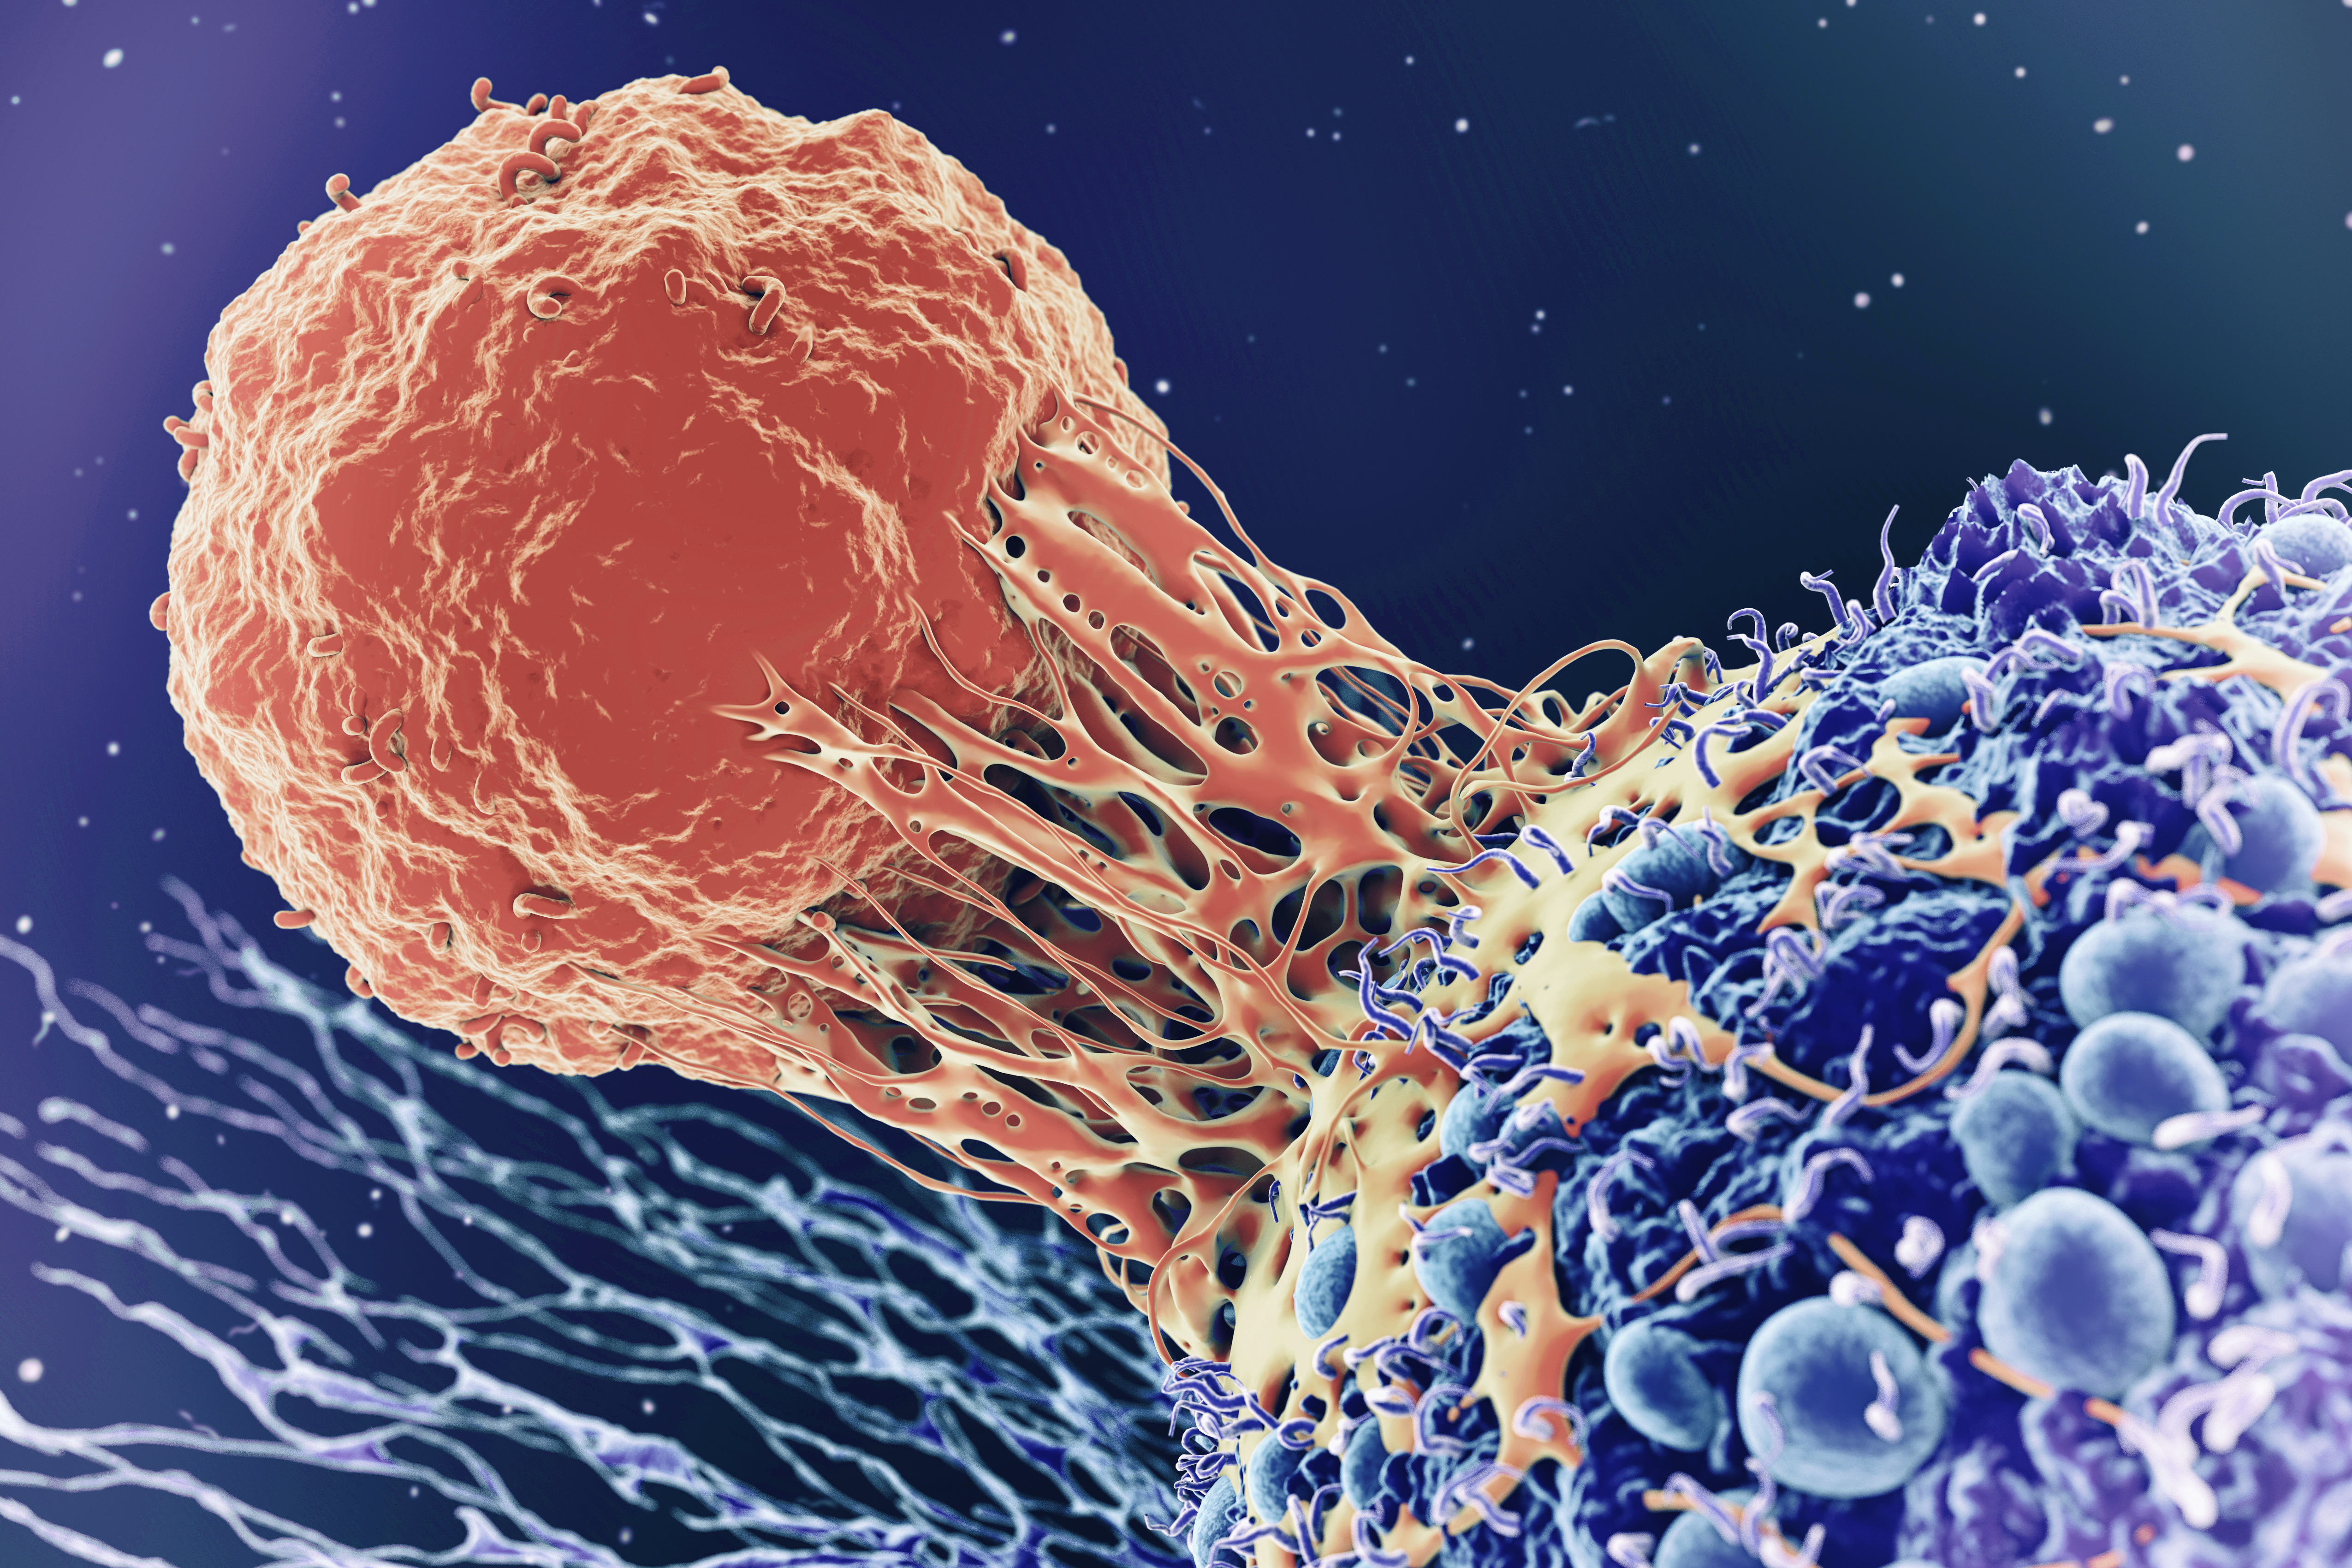 Cancer cell image